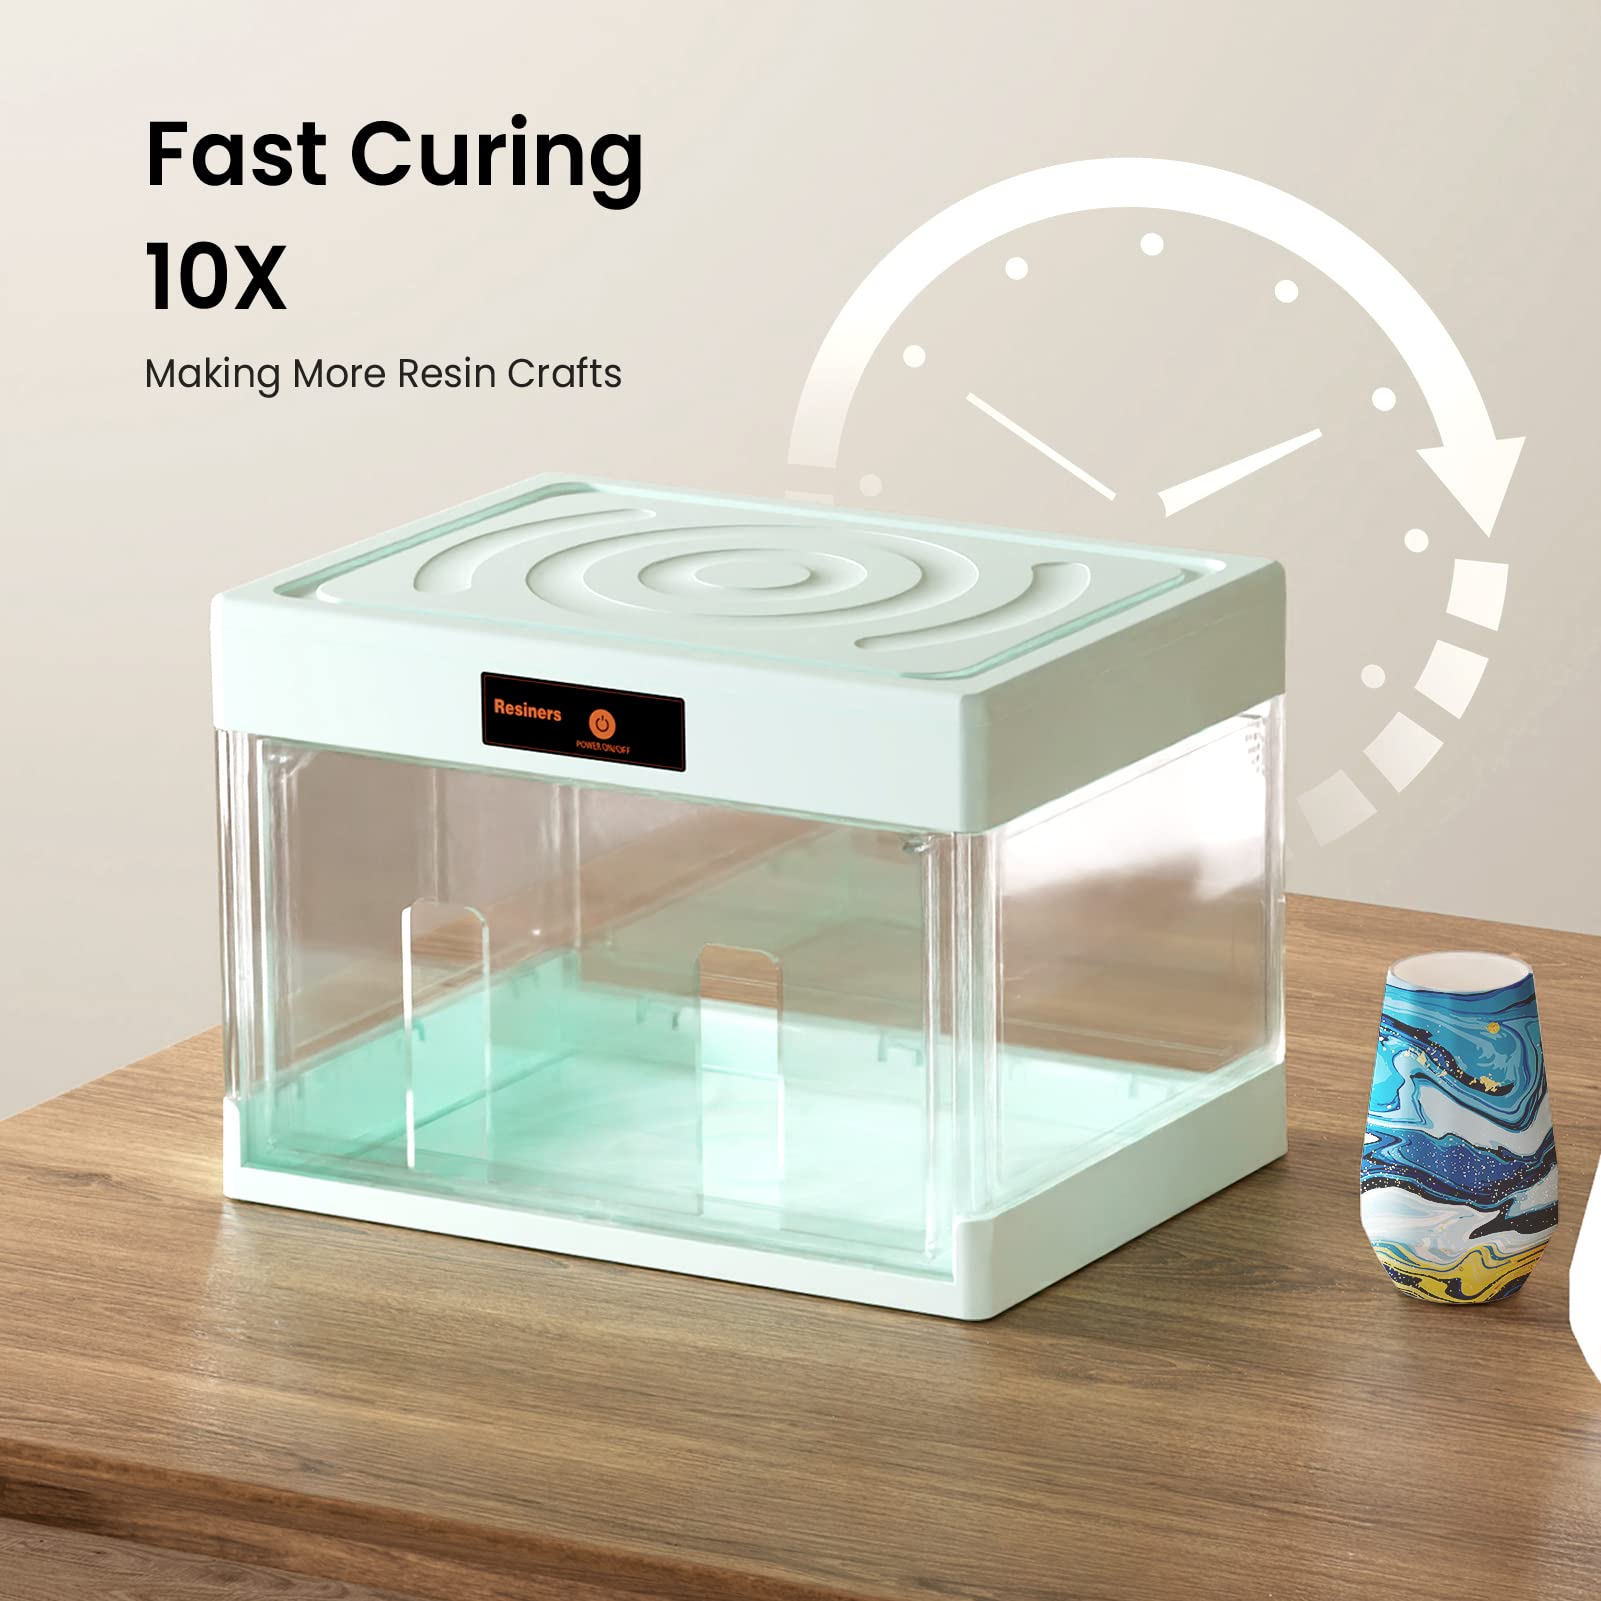 Resin Curing Machine, Cure Resin FAST, Jeezfee